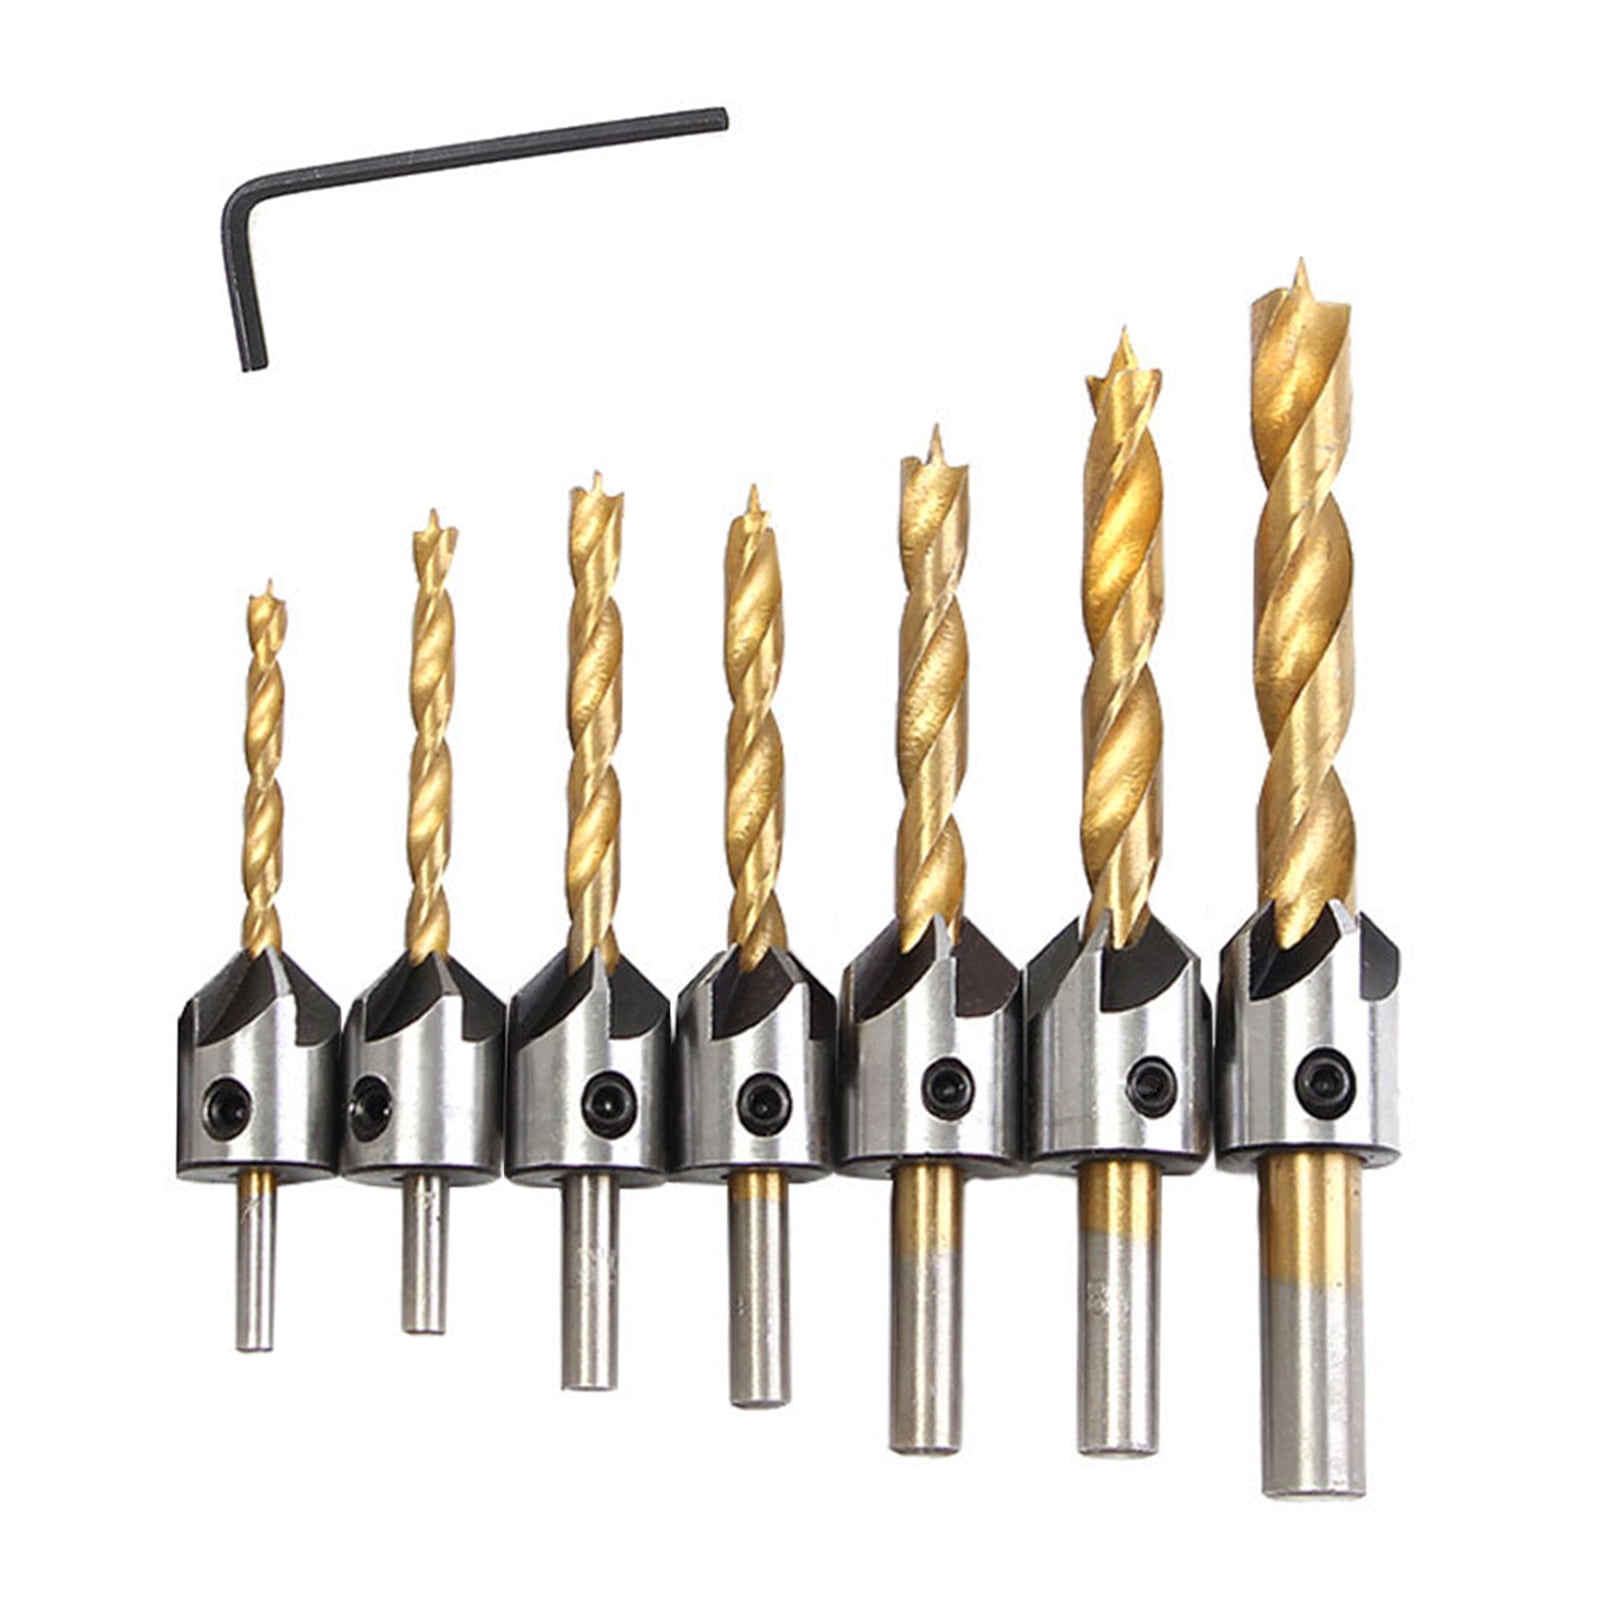 Single 5mm+Small Wrench Countersink Drill Bit,Steel Countersink Drill Bit Carpentry Woodworking Boring Tool Round Shank with Hex Key 